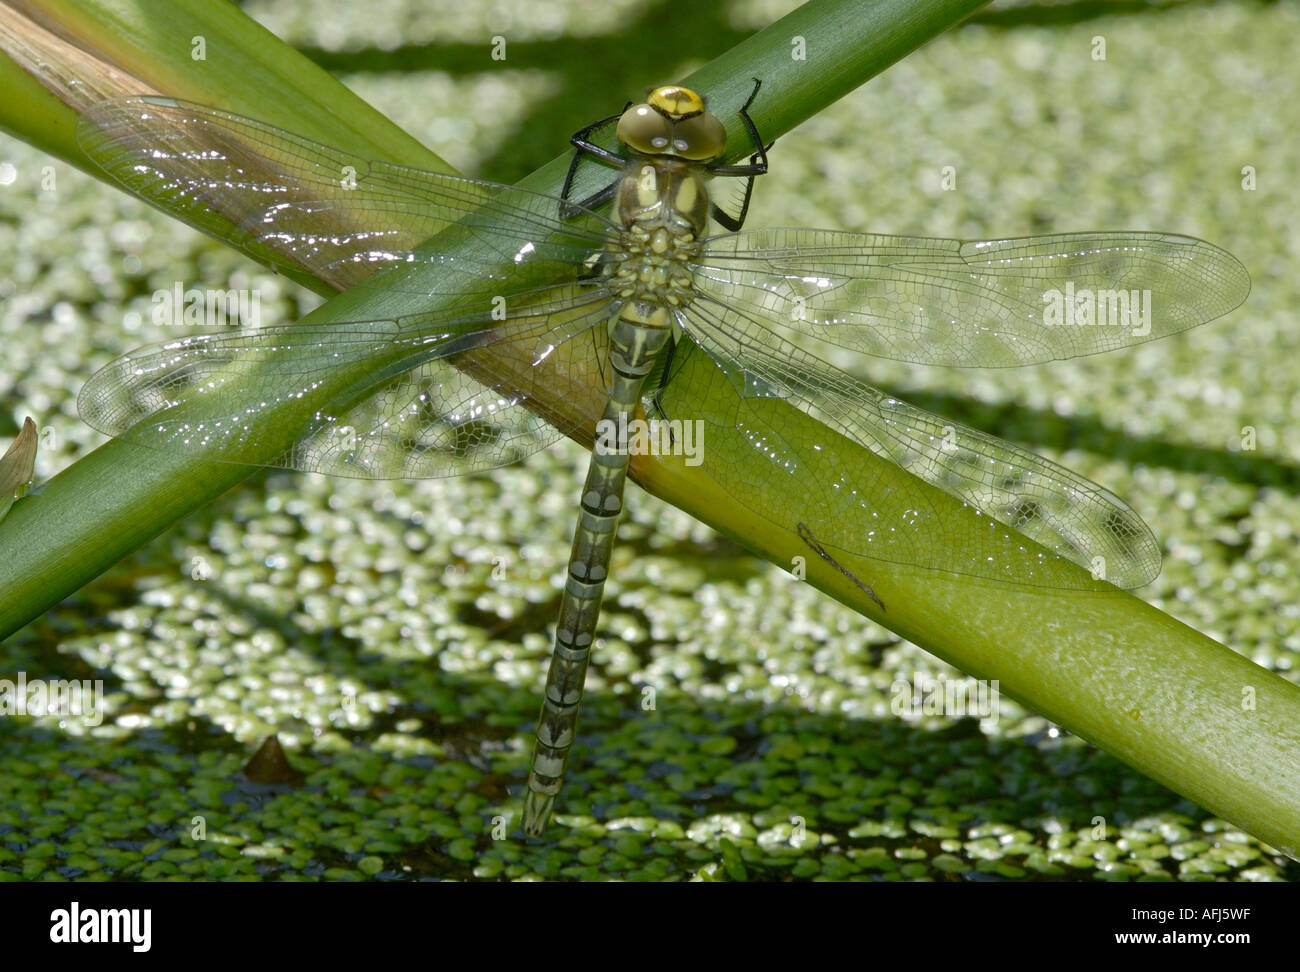 Aeshnid dragonfly  in close up showing the whole insect resting on pond vegetation Stock Photo